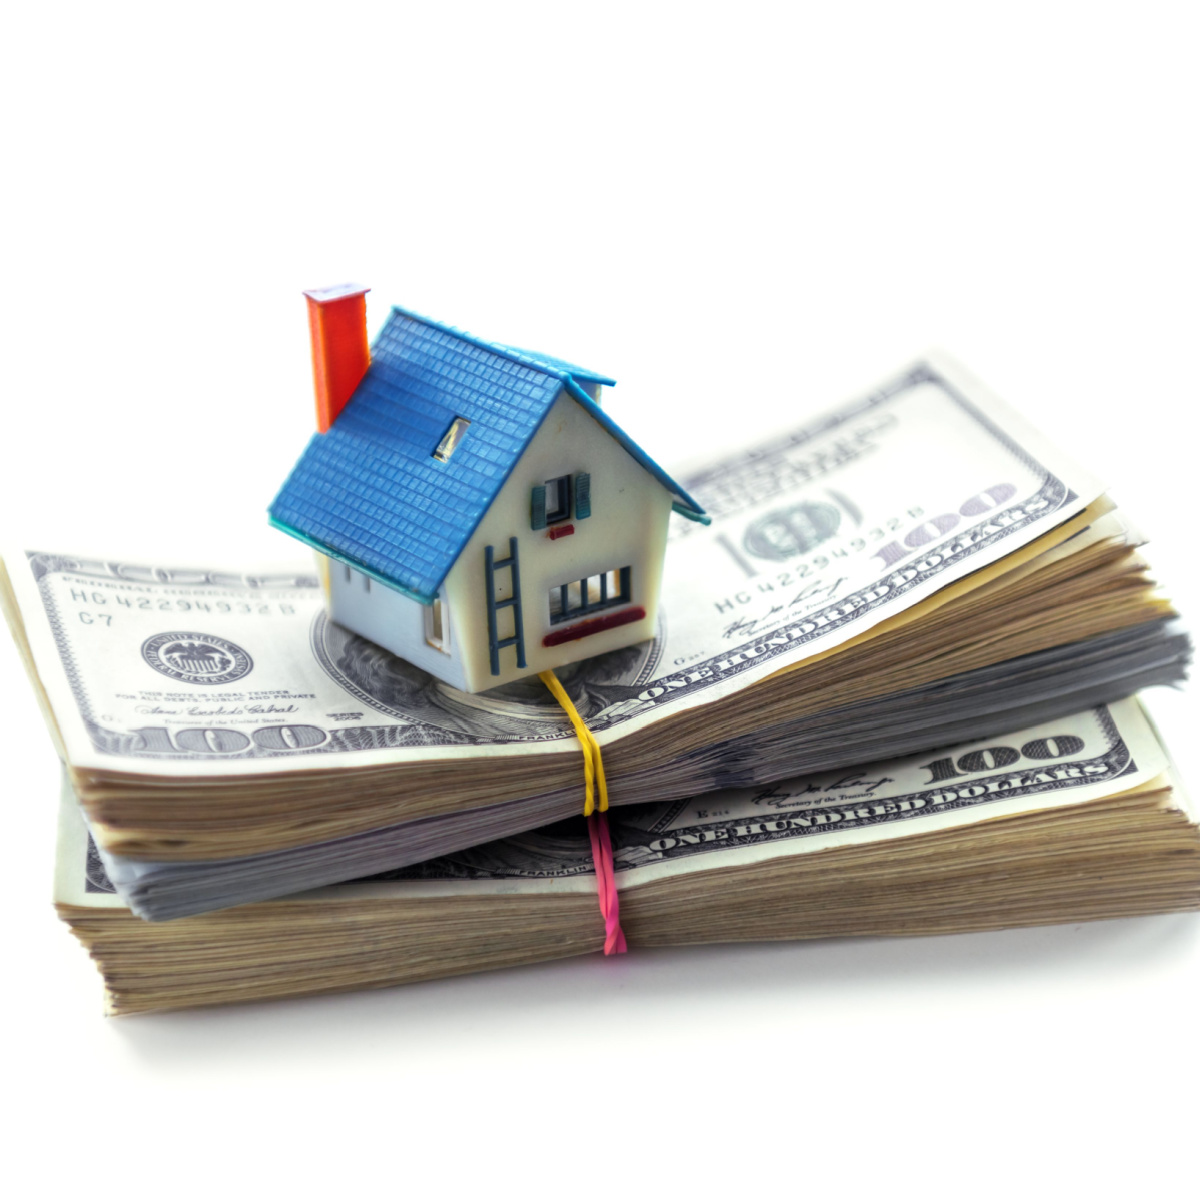 Sell your Houston house fast for cash in as-is condition.